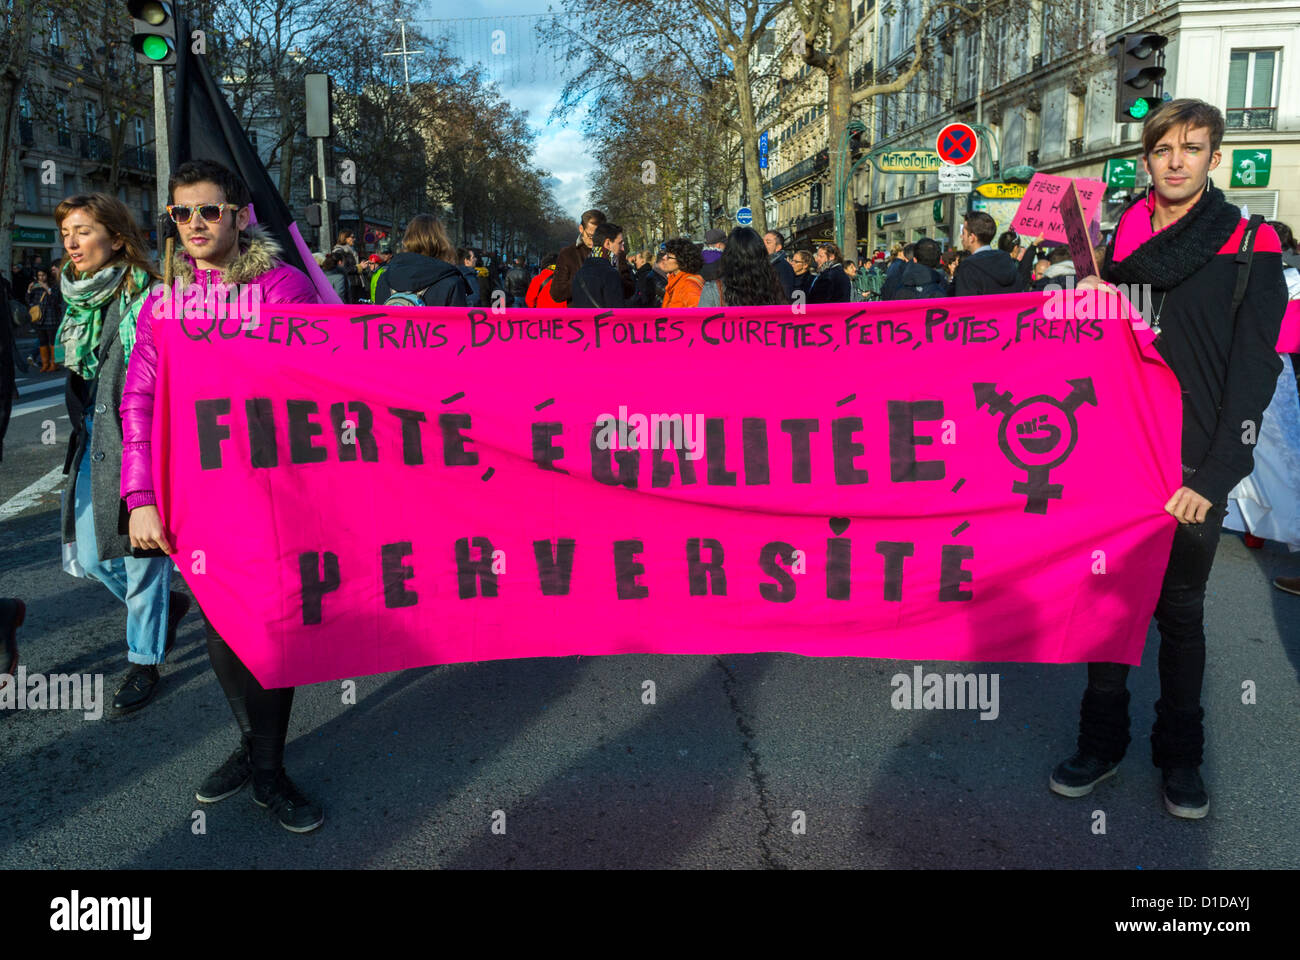 Paris, France, Young Men Holding Protest Banner in Gay Marriage Demonstration, LGBT Activism, 'Pink Block' Protests on Street, Civil Rights protest march Stock Photo